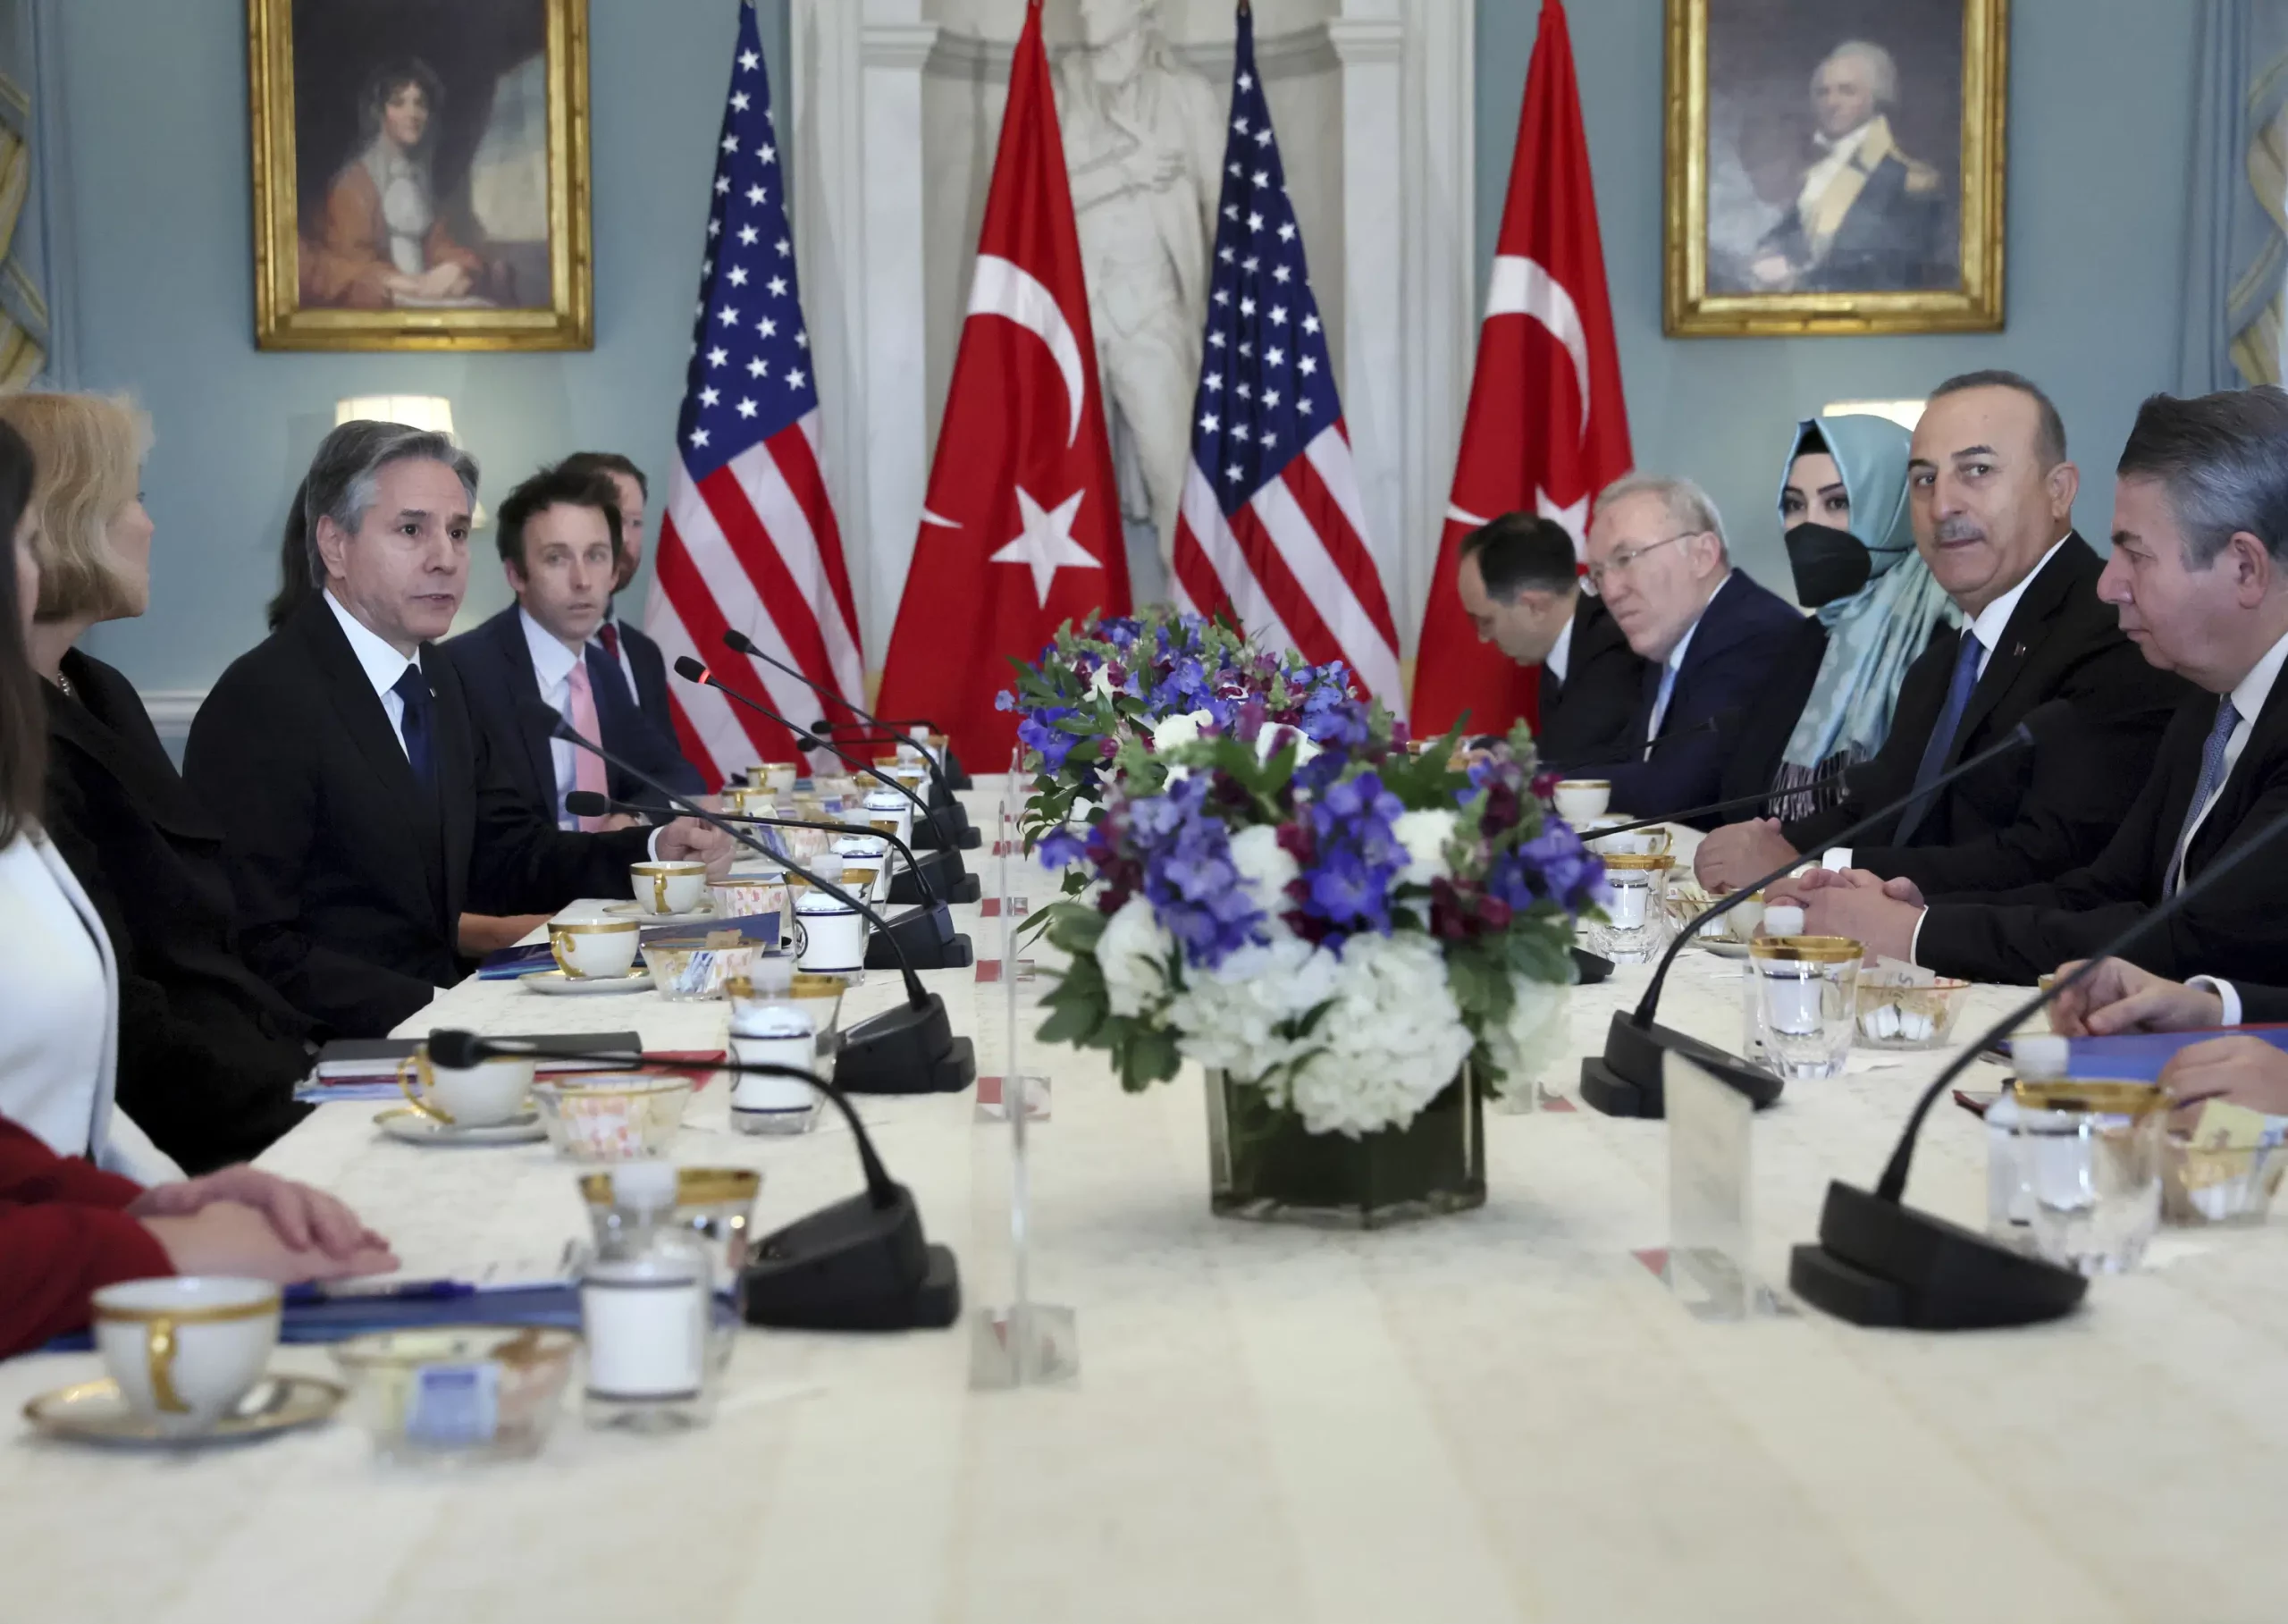 NATO allies US, Turkey try to mend fences but rifts persist 6